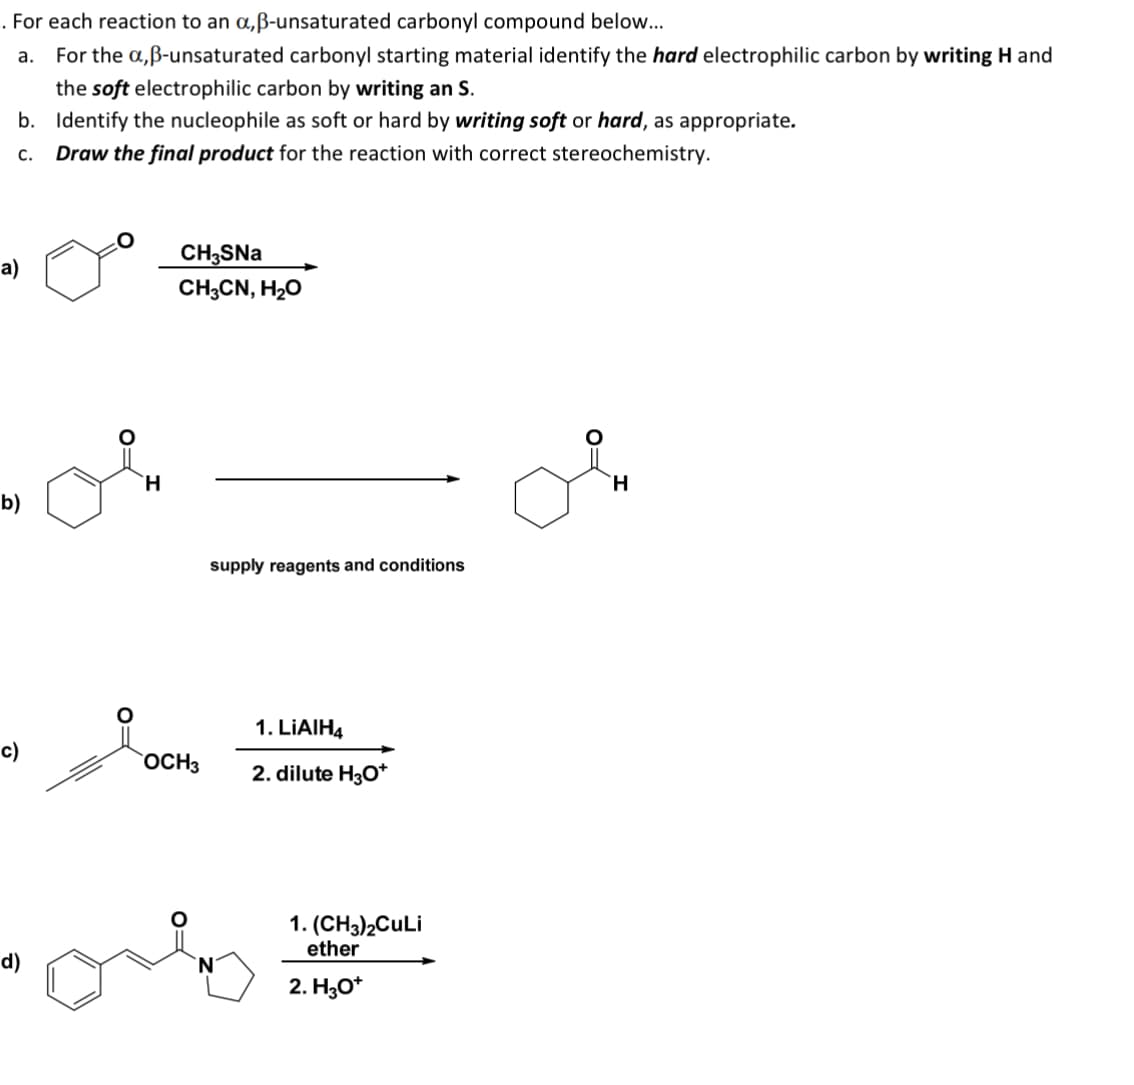 . For each reaction to an α,ẞ-unsaturated carbonyl compound below...
a. For the a,ẞ-unsaturated carbonyl starting material identify the hard electrophilic carbon by writing H and
the soft electrophilic carbon by writing an S.
b. Identify the nucleophile as soft or hard by writing soft or hard, as appropriate.
C. Draw the final product for the reaction with correct stereochemistry.
a)
b)
c)
H
CH3SNa
CH3CN, H₂O
supply reagents and conditions
1. LiAlH4
OCH3
2. dilute H3O+
d)
1. (CH3)2CuLi
ether
2. H3O+
H